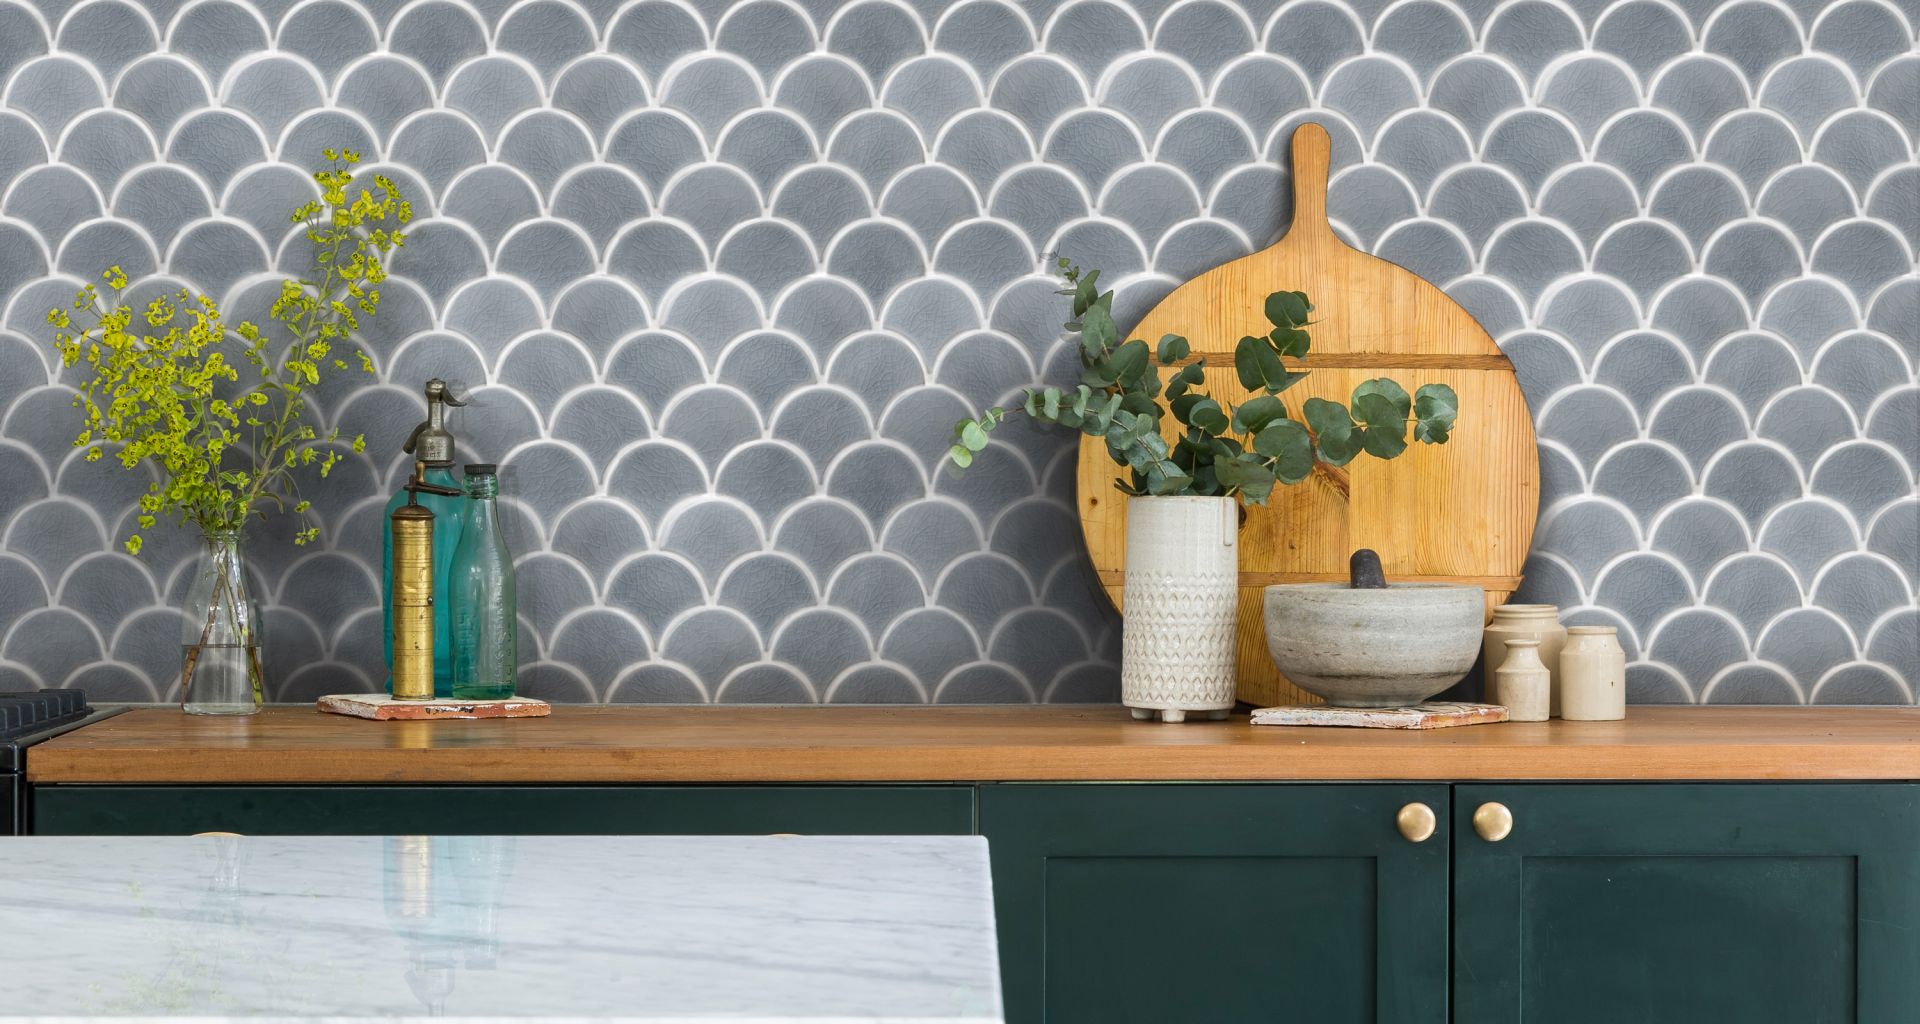 Kitchen wall tile ideas – bring color, pattern and style to vertical ...